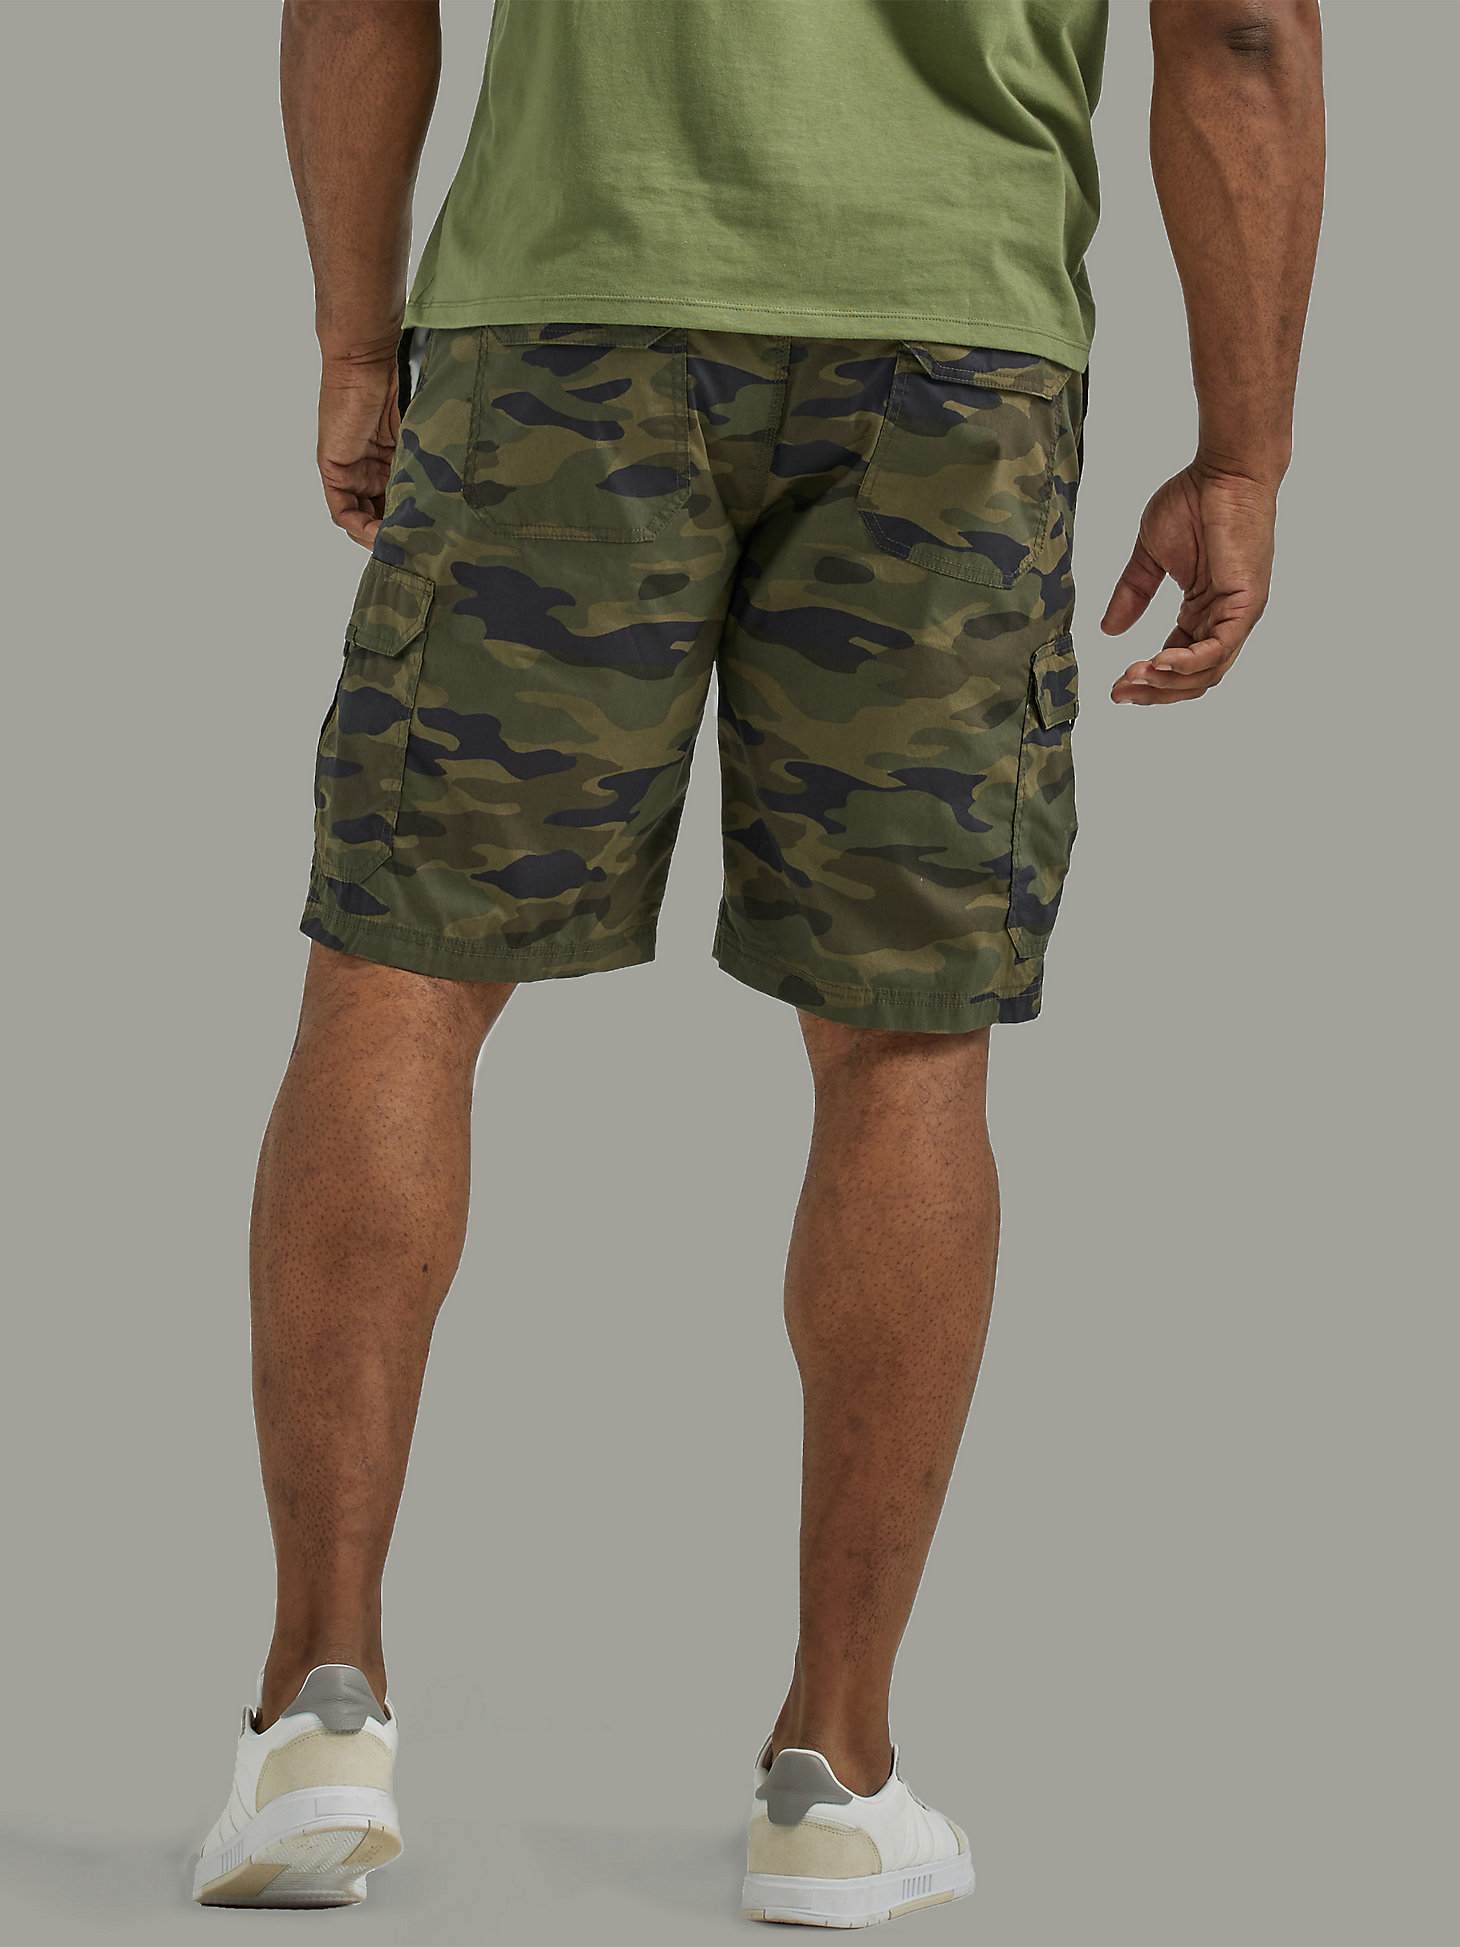 Men's Extreme Motion Crossroads Short (Big & Tall) in Traditional Camo alternative view 1